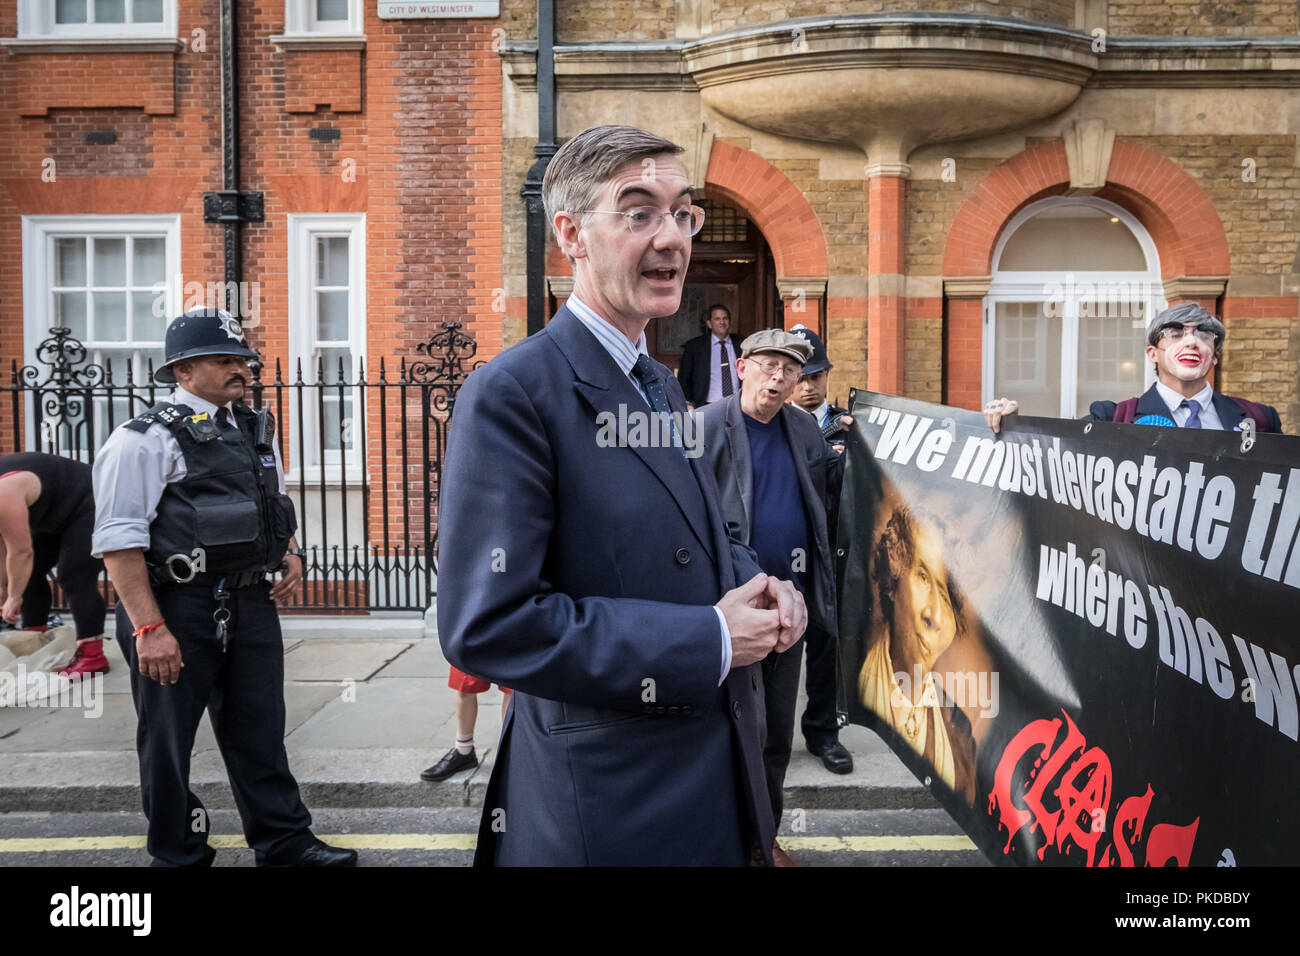 Jacob Rees-Mogg and his family are confronted by anti-capitalist protesters from Class War activist group outside his Westminster home. London, UK. Stock Photo